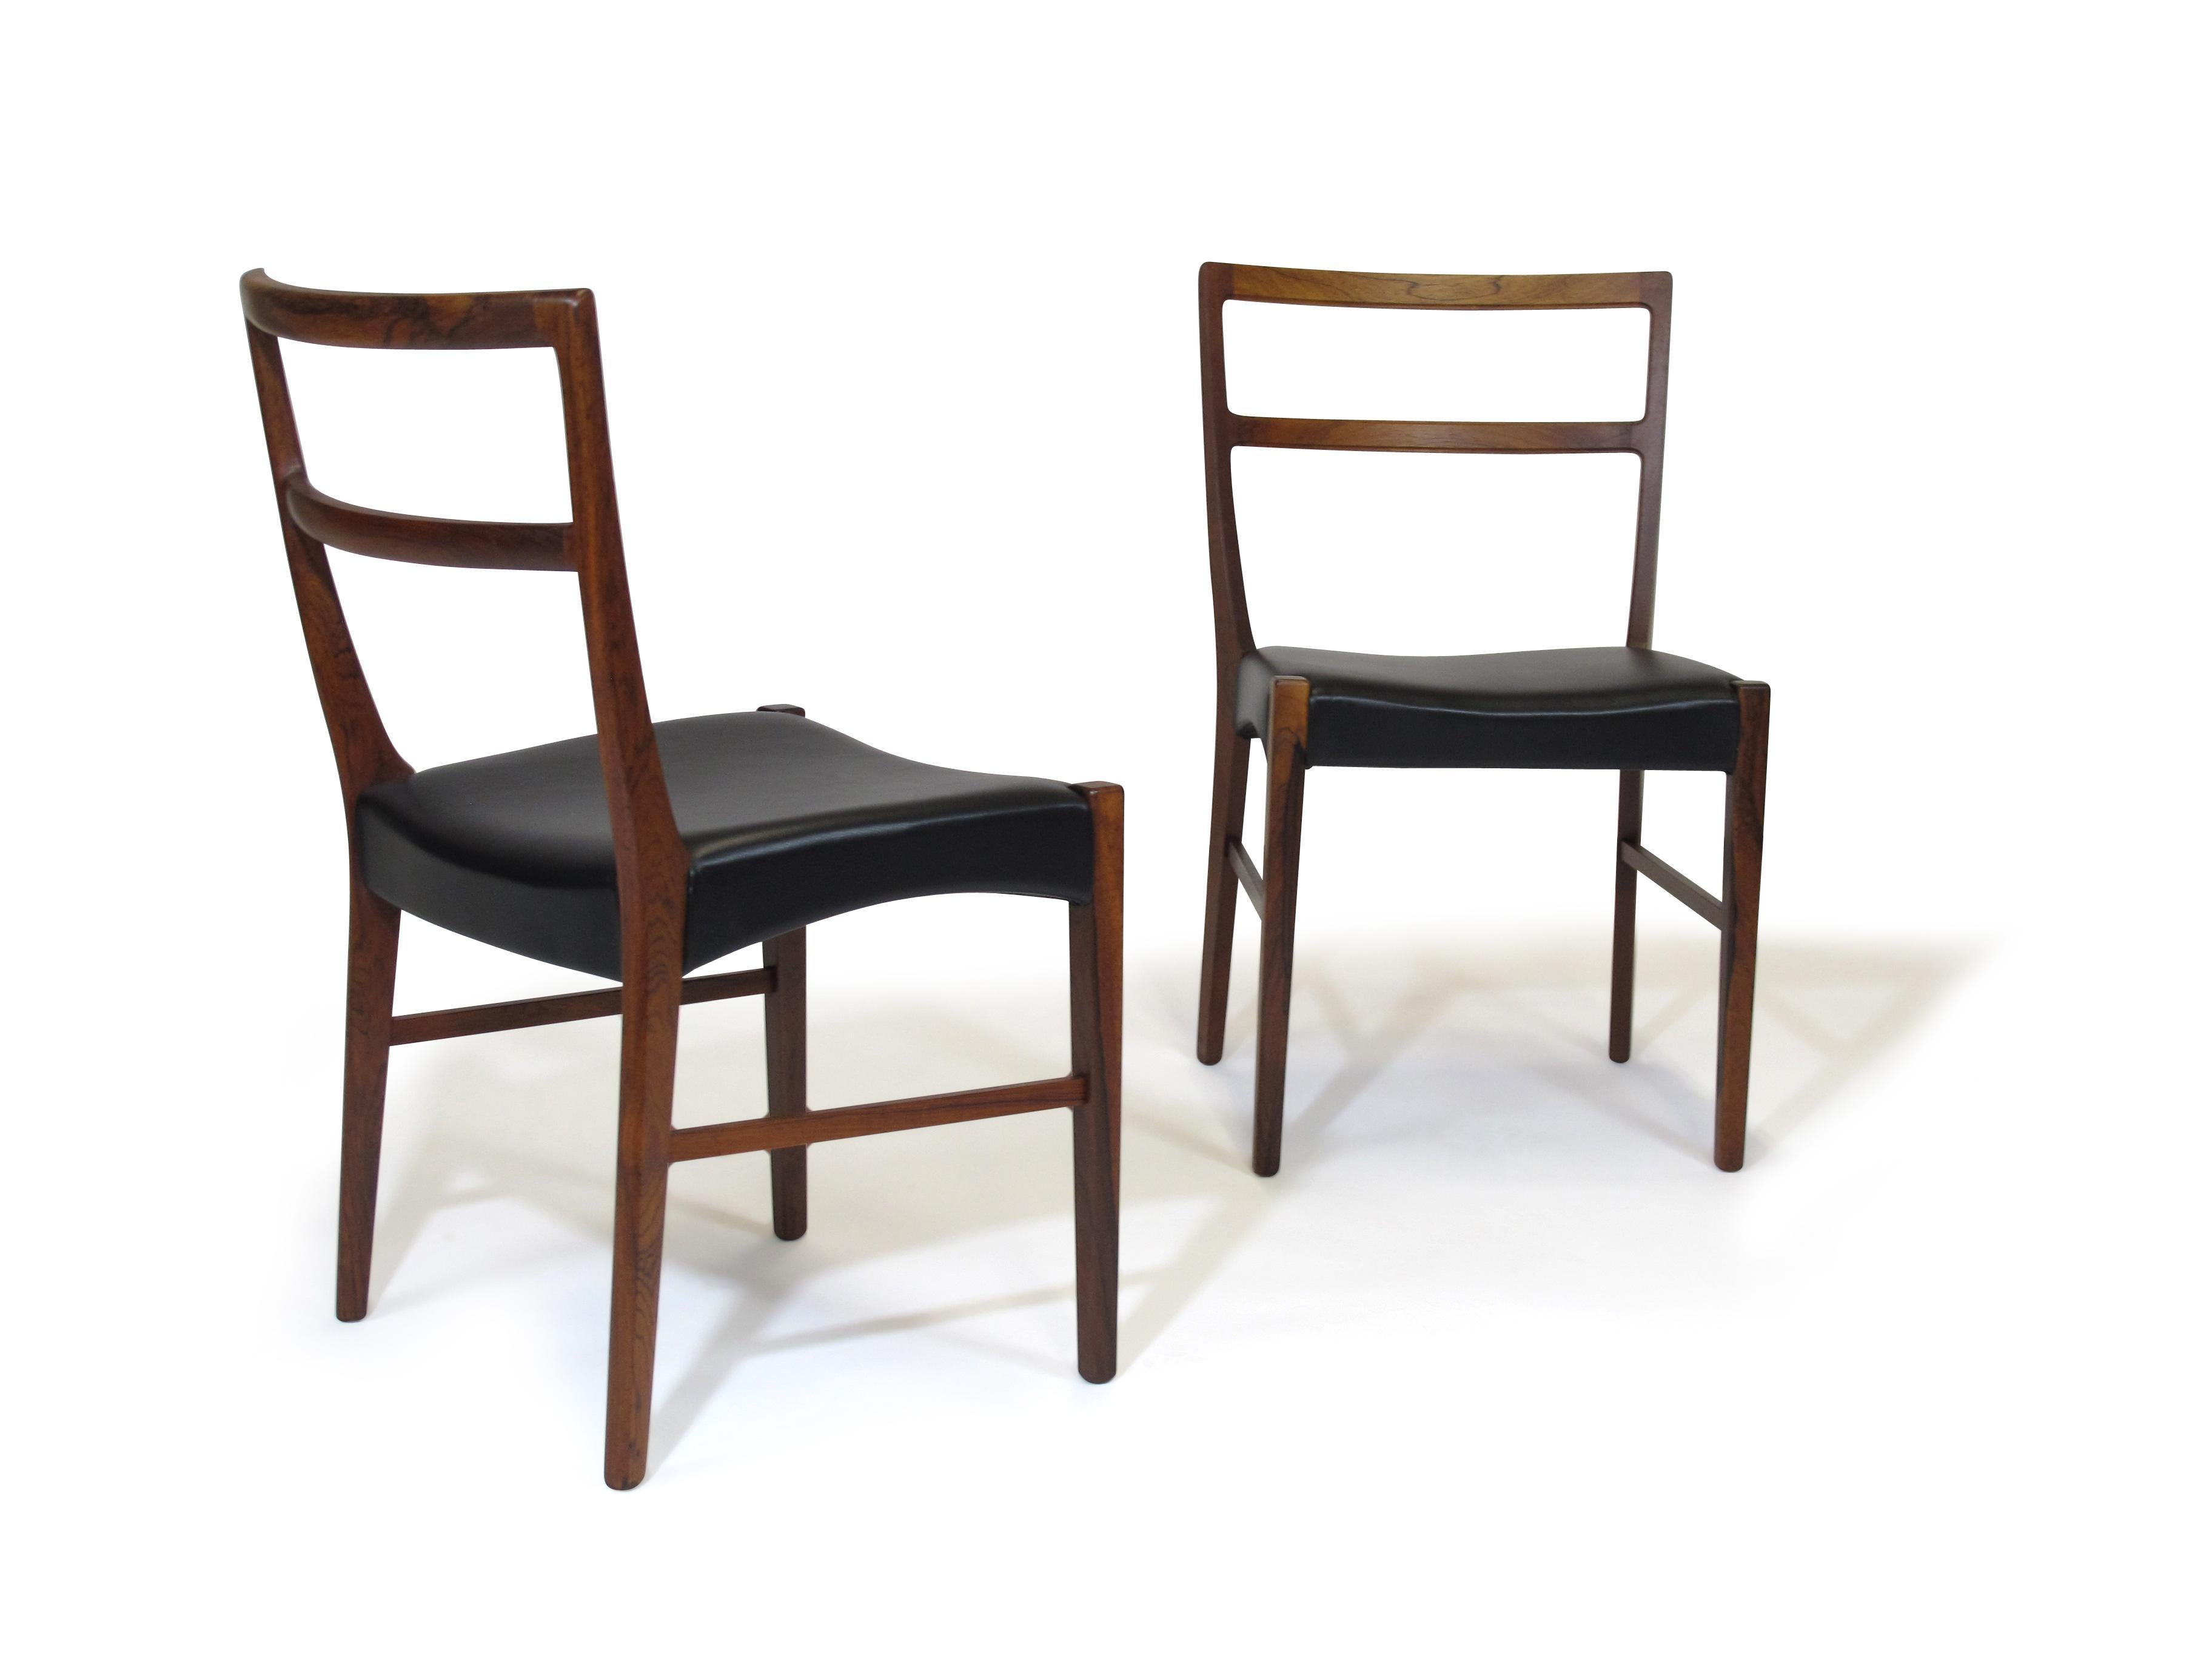 Minimal and classic form dining chairs designed by Johannes Andersen, handcrafted by Bernhard Pedersen Sons, Denmark in 1965. The elegant set of eight chairs feature solid Brazilian rosewood frames; lightly restored preserving original patina and